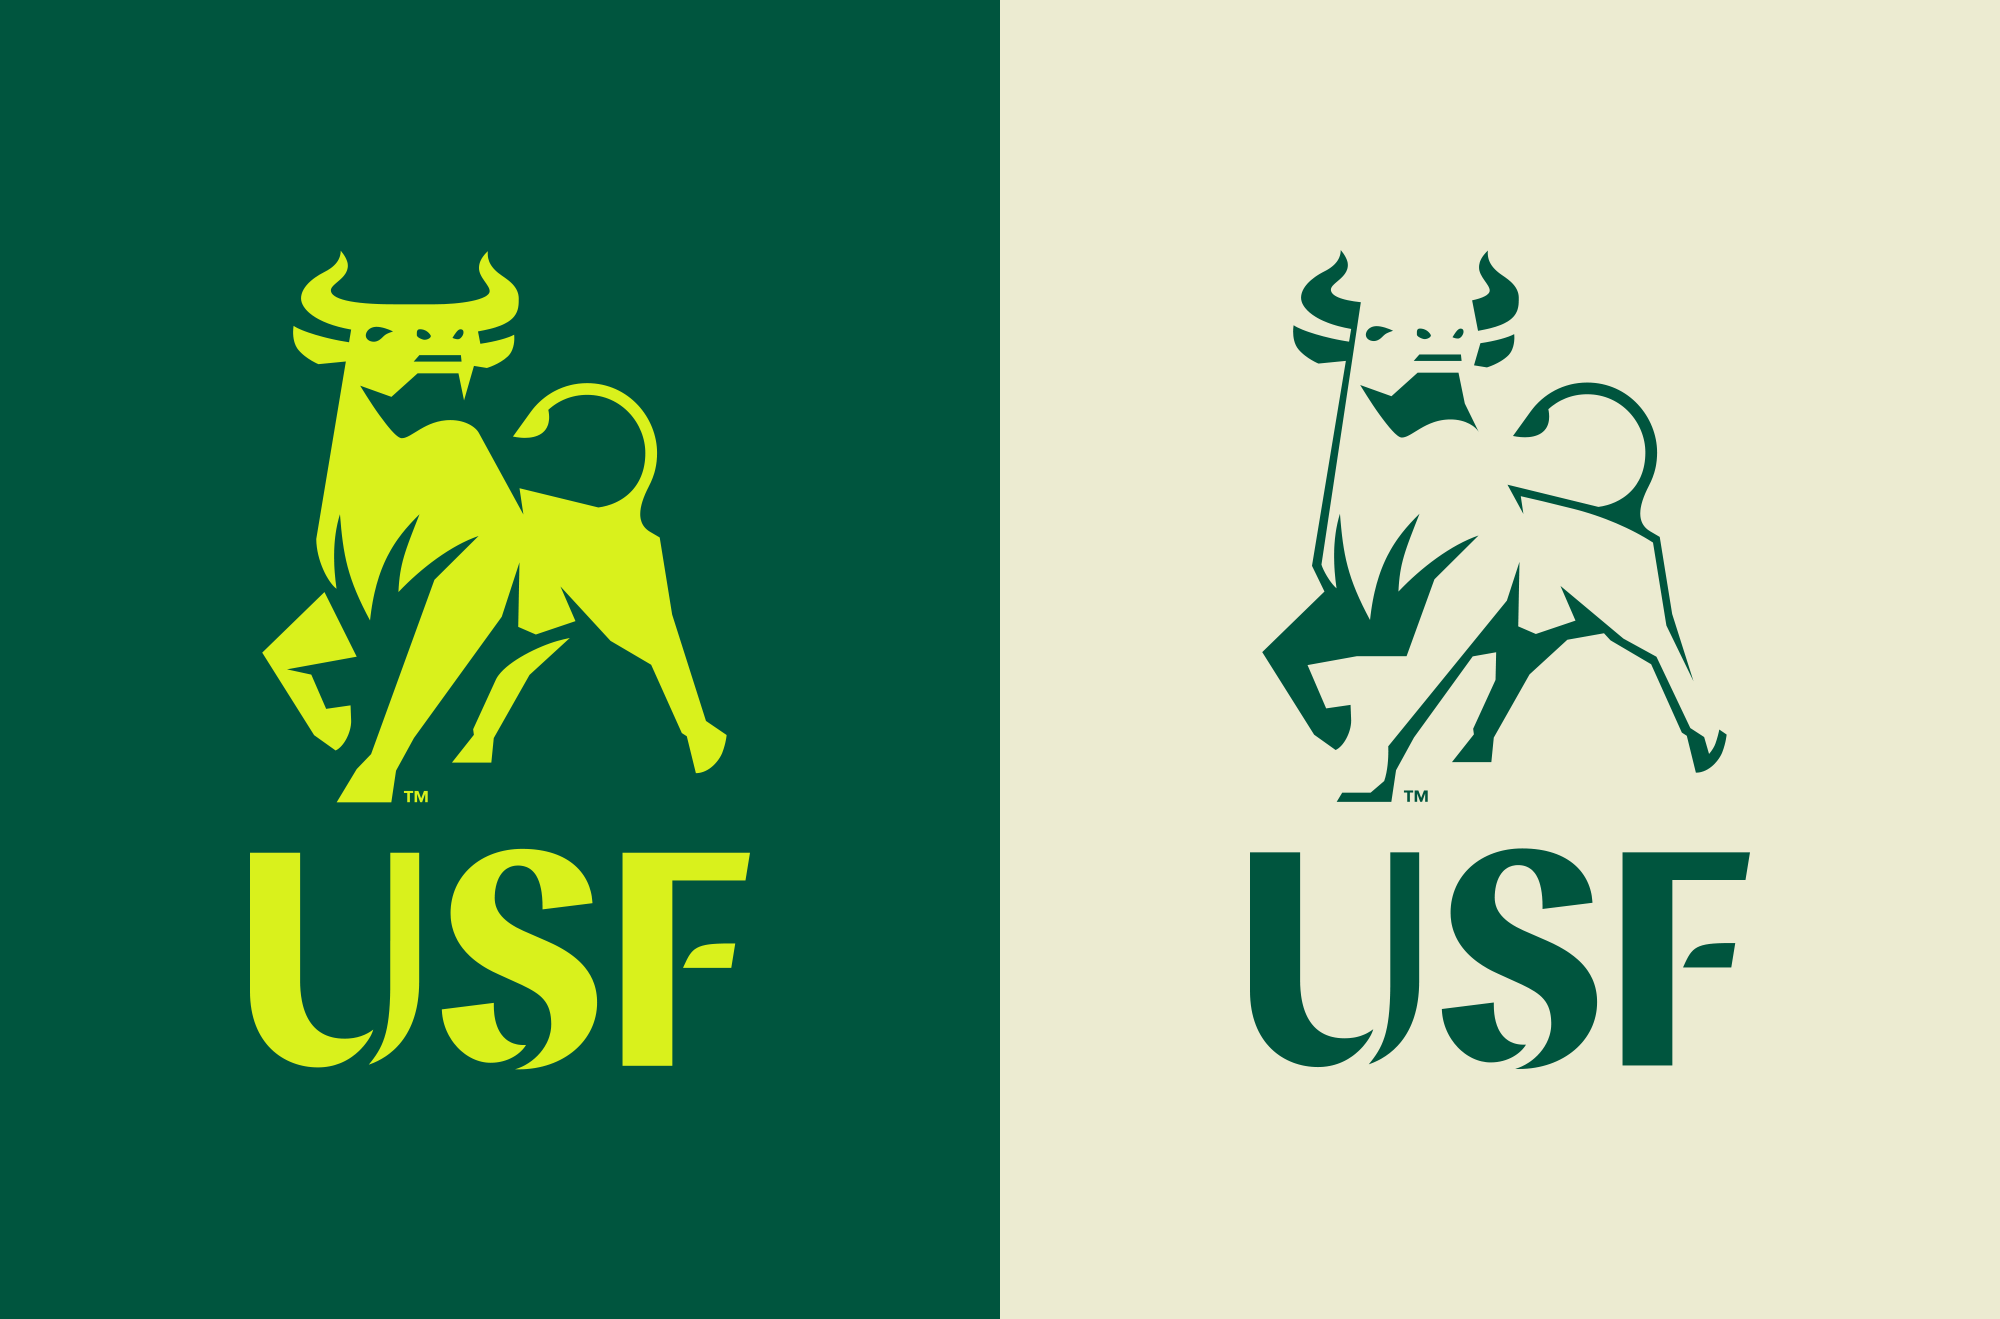 USF Logo - Brand New: New Logo and Identity for University of South Florida by ...